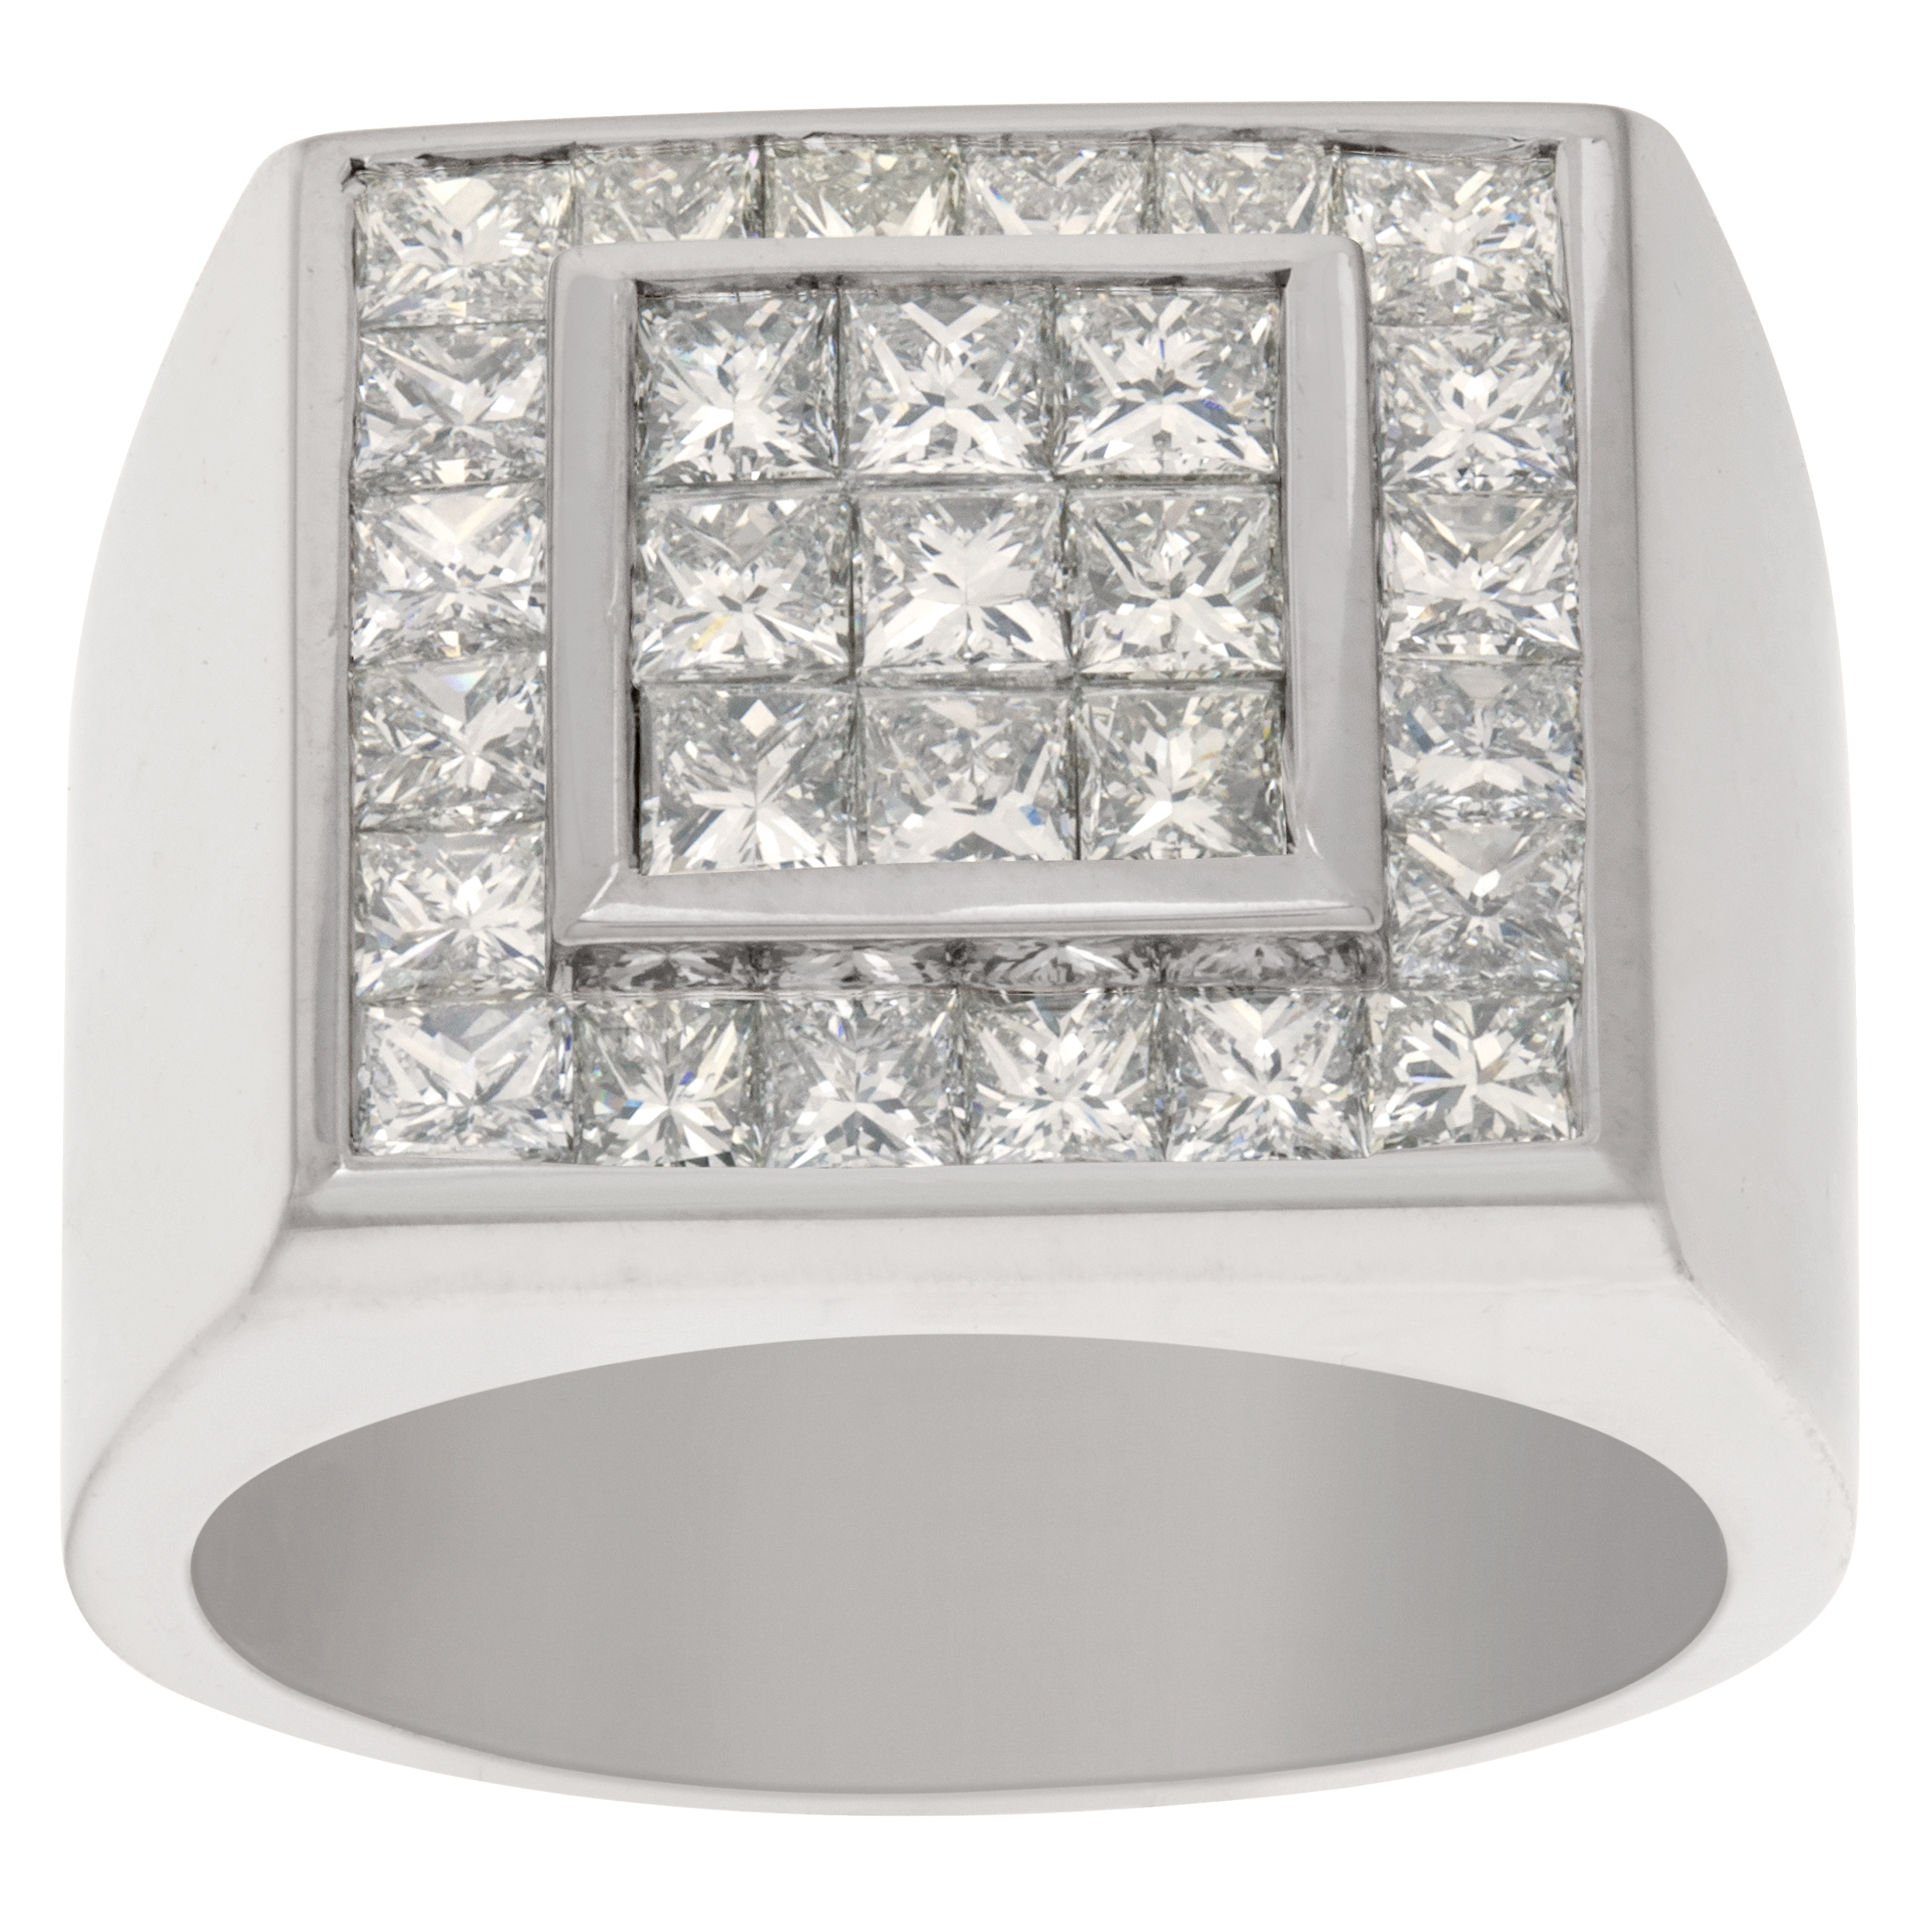 Men's 18k white gold princess cut channel set ring with 4.1 carats in diamonds